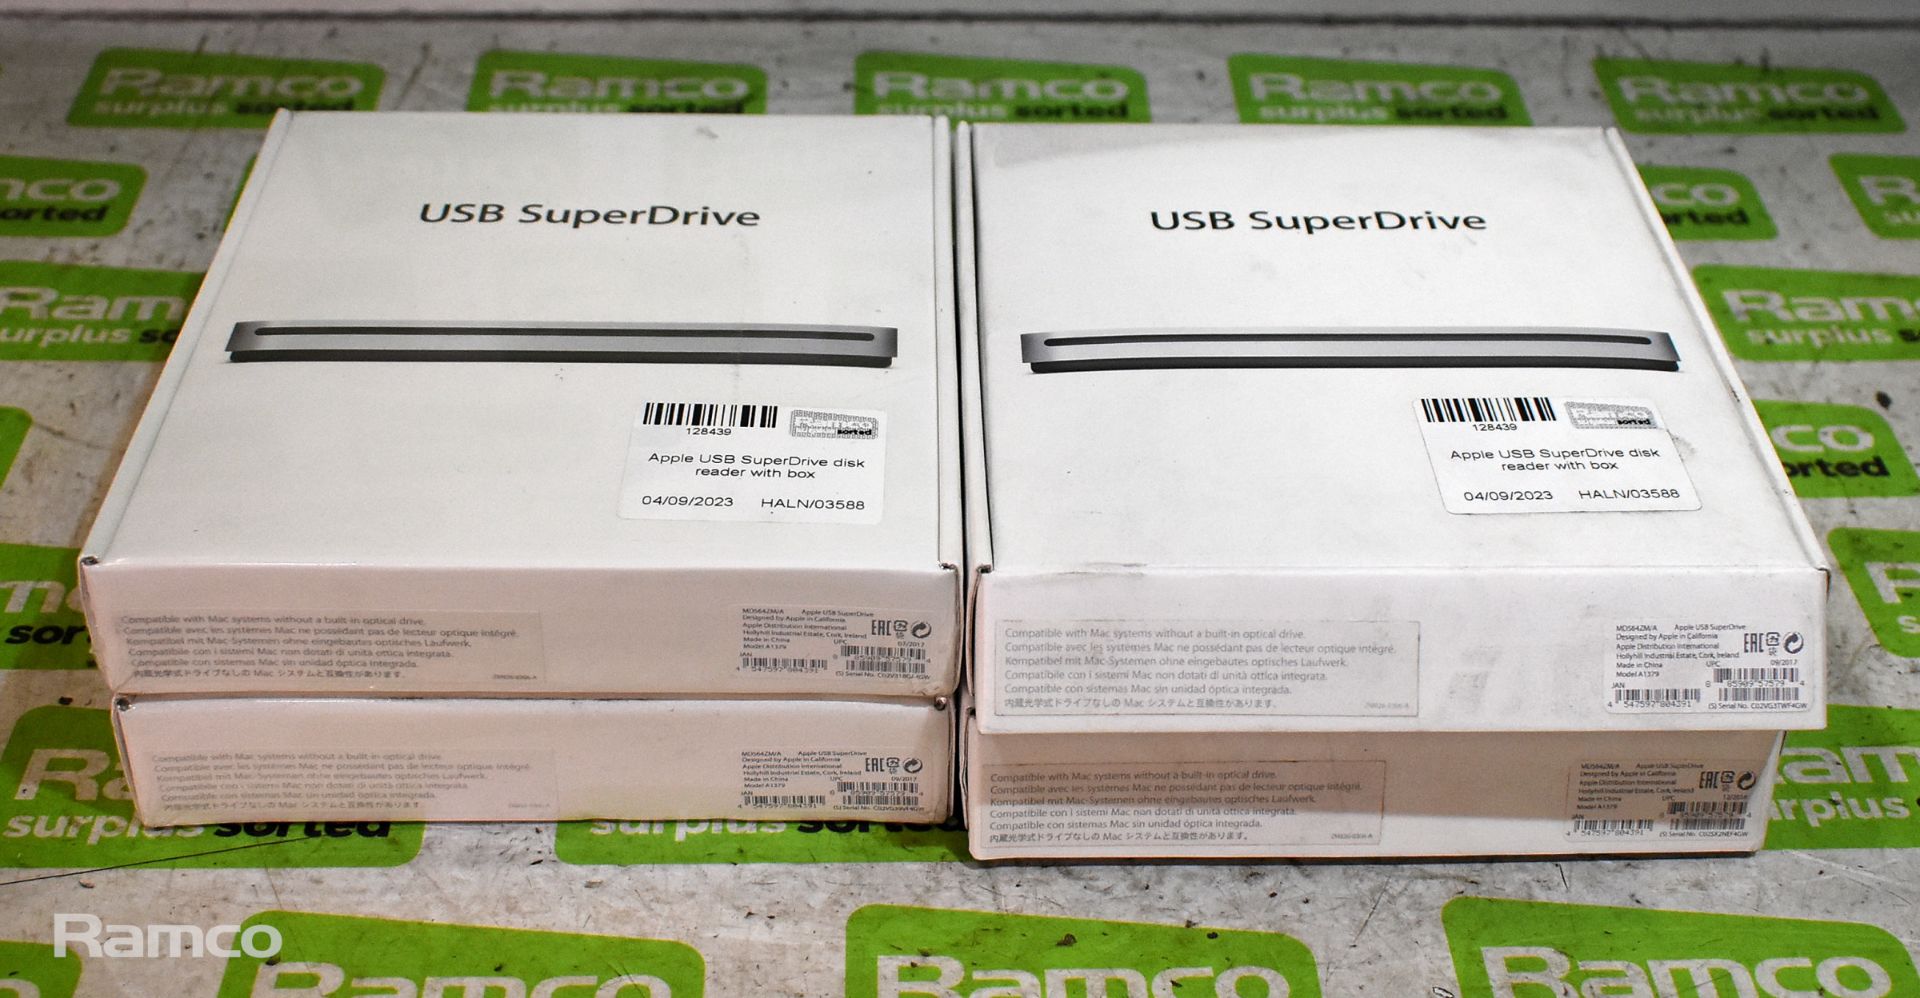 4x Apple A1379 USB SuperDrive disk readers with box - Bild 5 aus 7